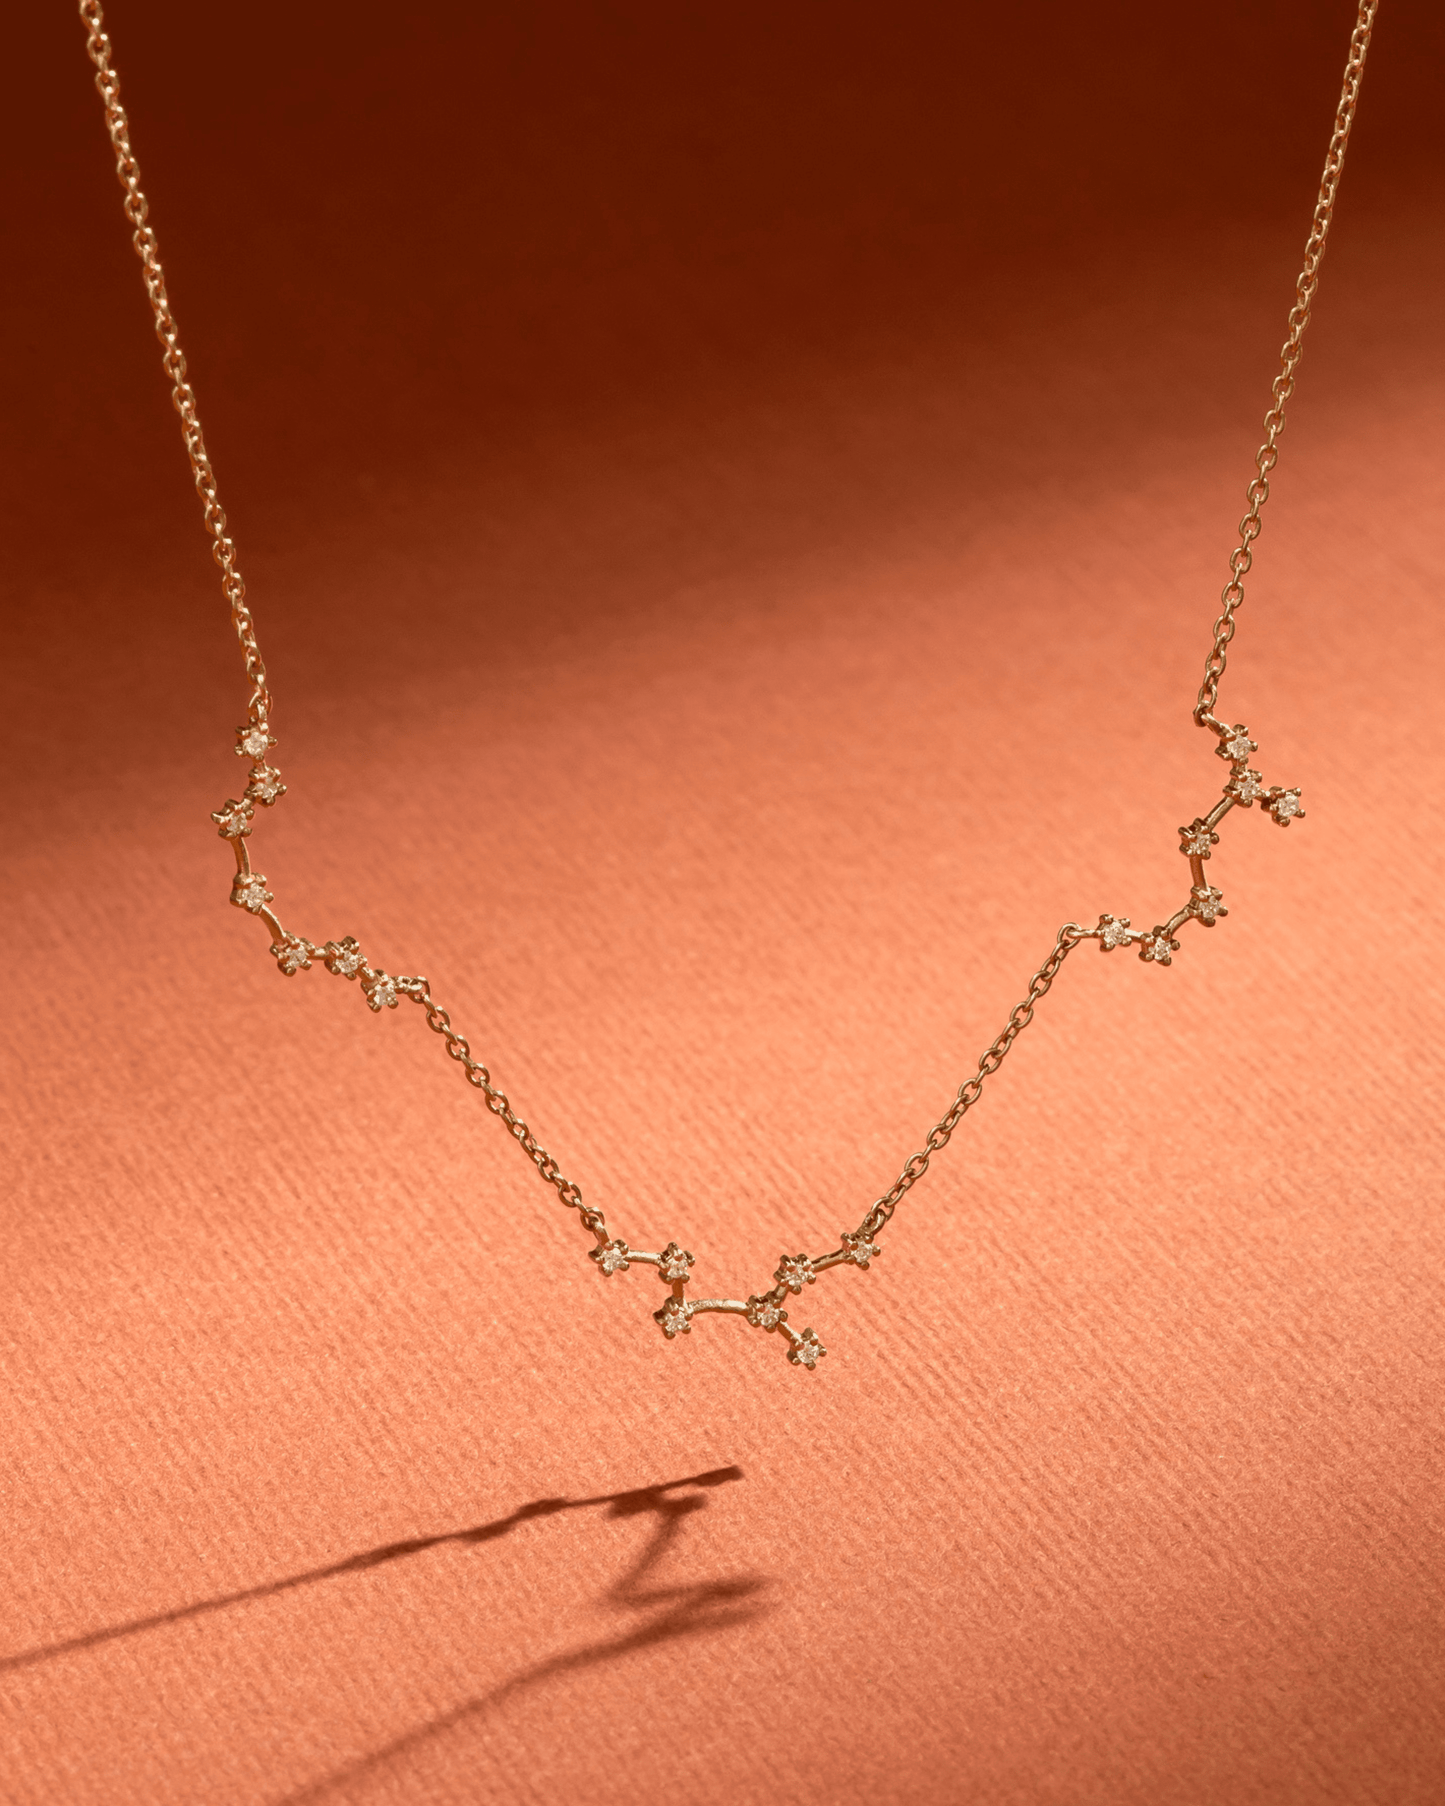 Constellation Necklace with Diamonds - 14K Yellow Gold Necklaces magal-dev 